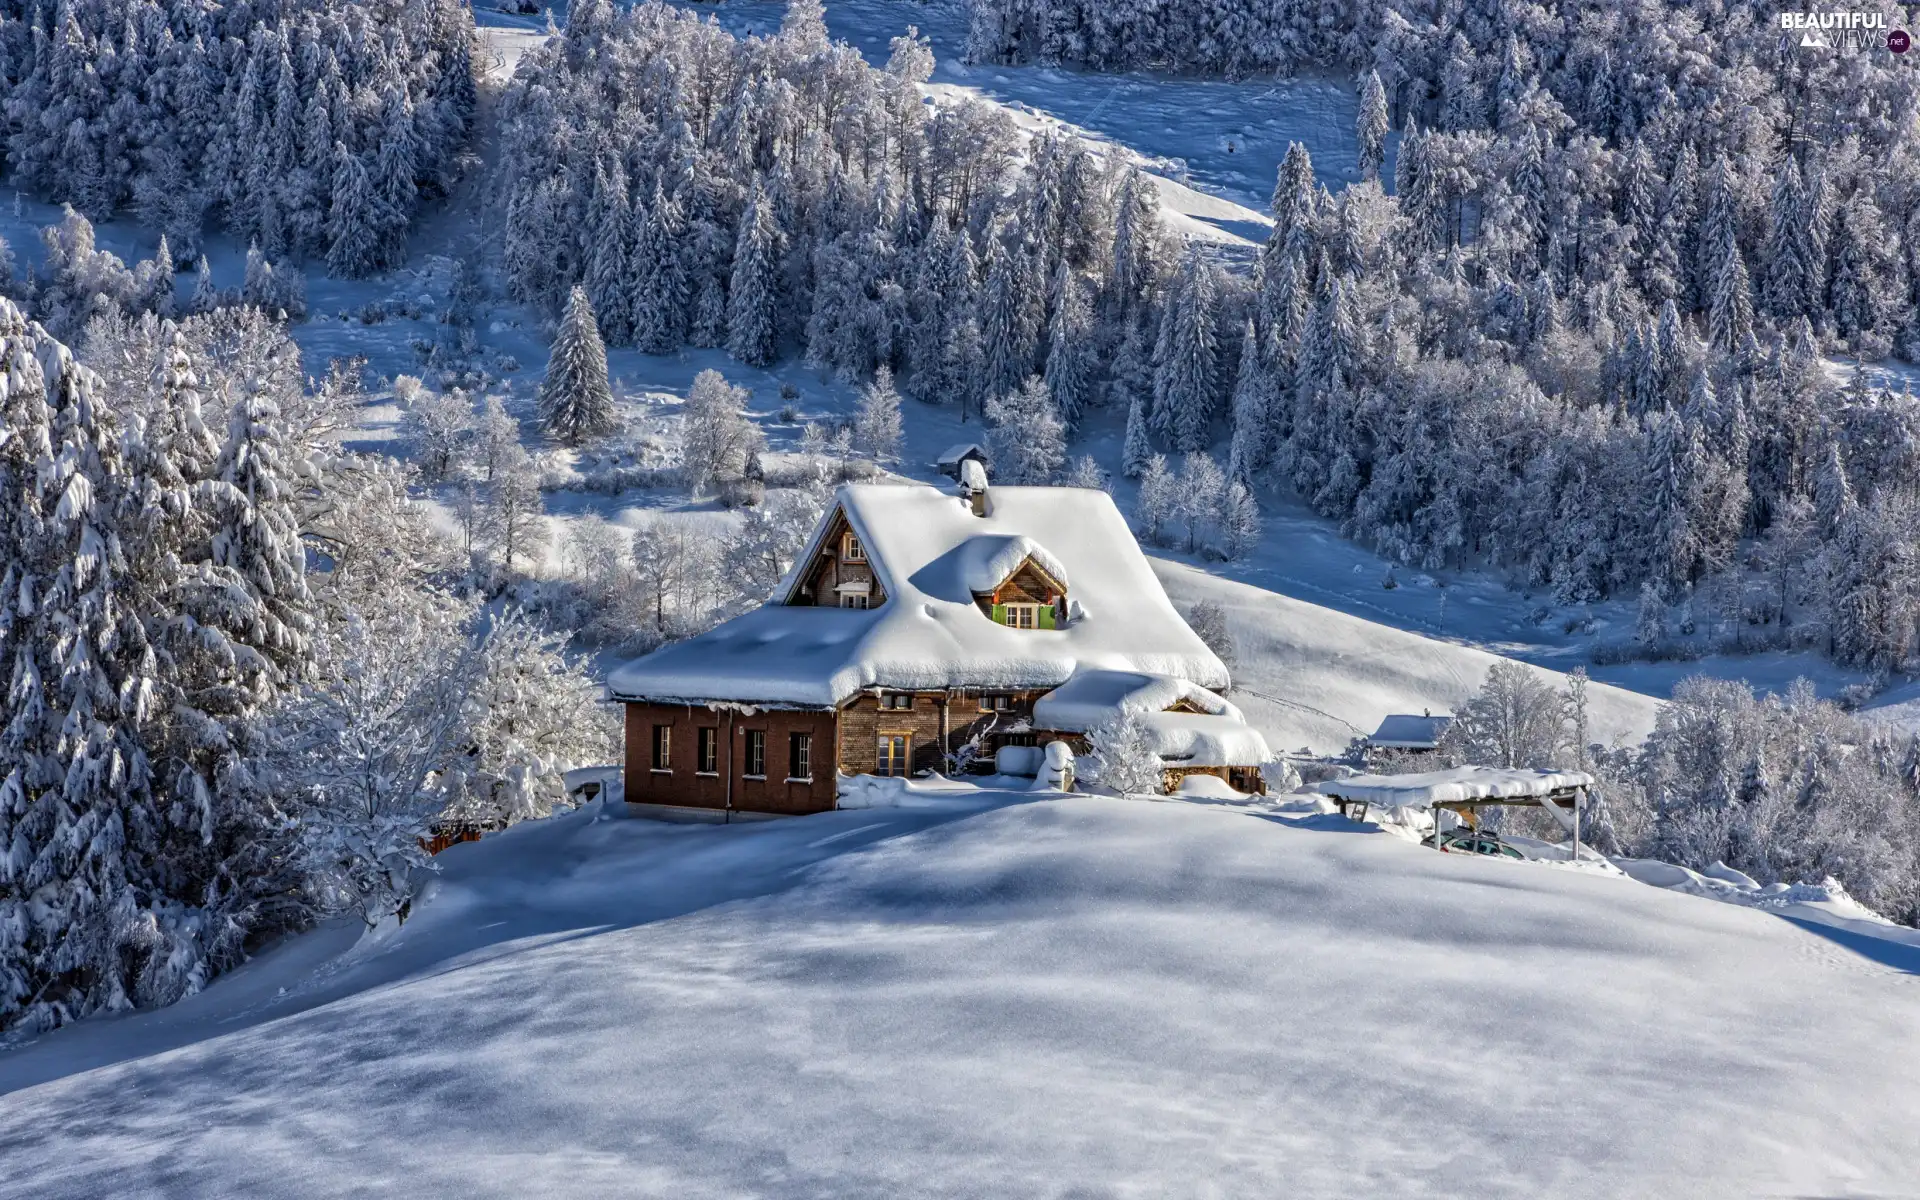 viewes, snow, woods, trees, winter, Mountains, house